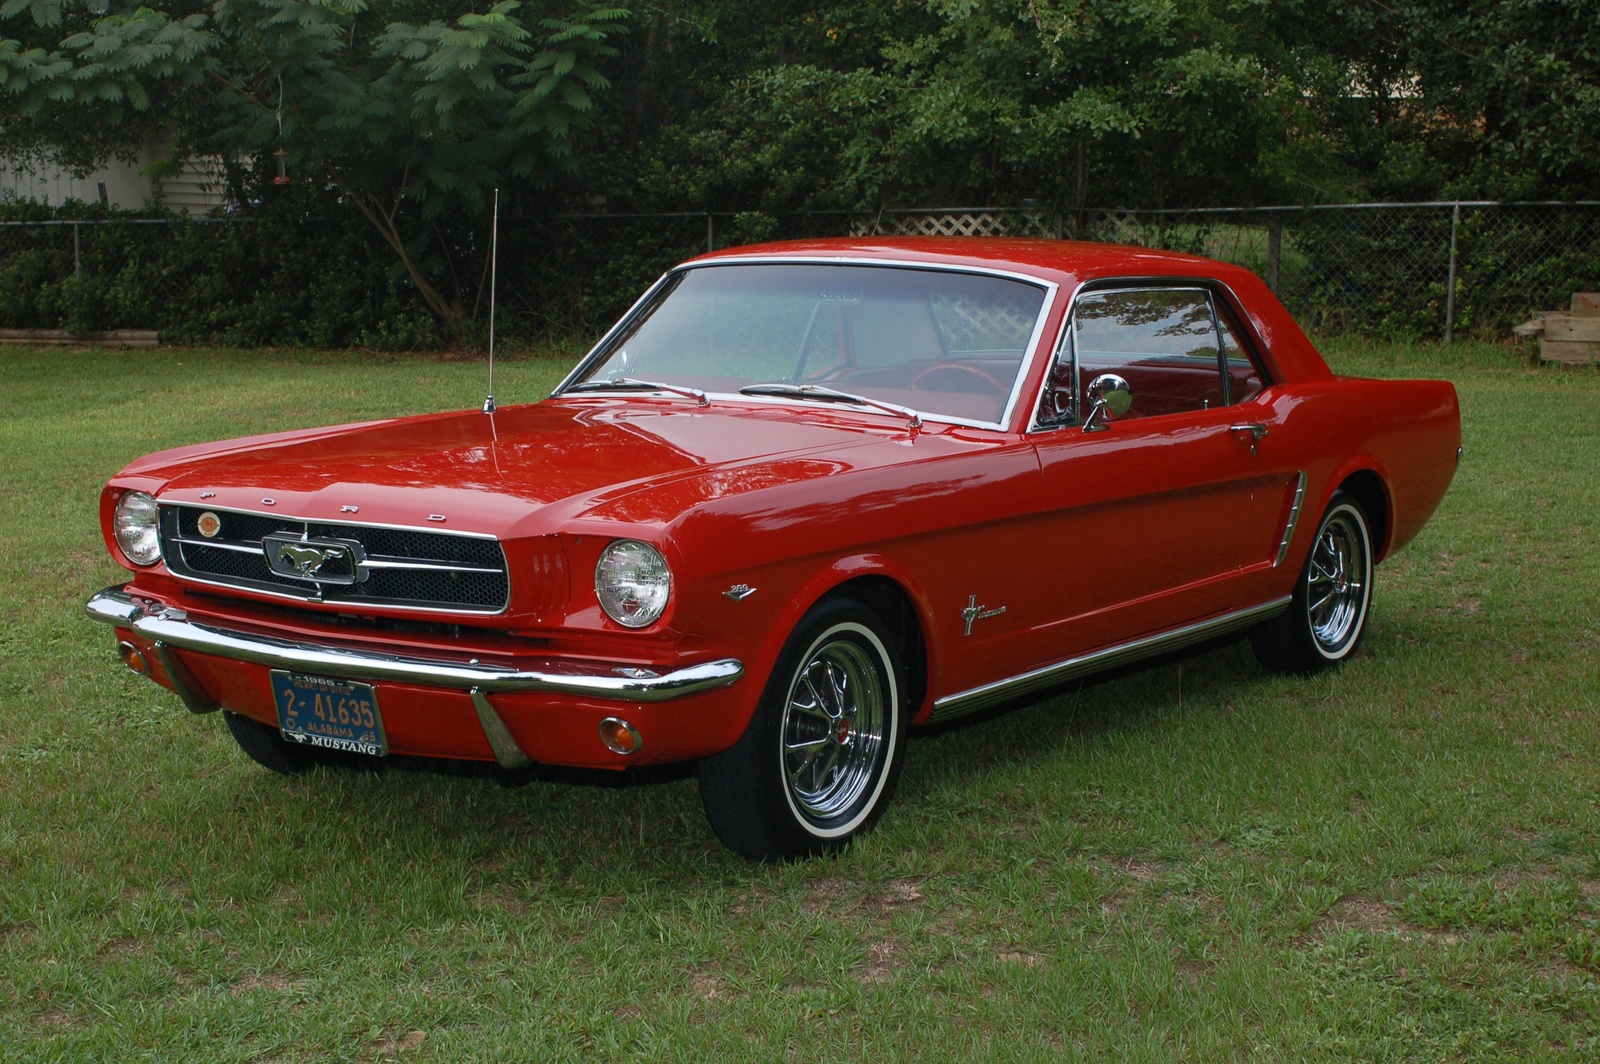 EVEN BETTER THAN THE EDSEL - The Ford Mustang, introduced in 1964, took America by storm